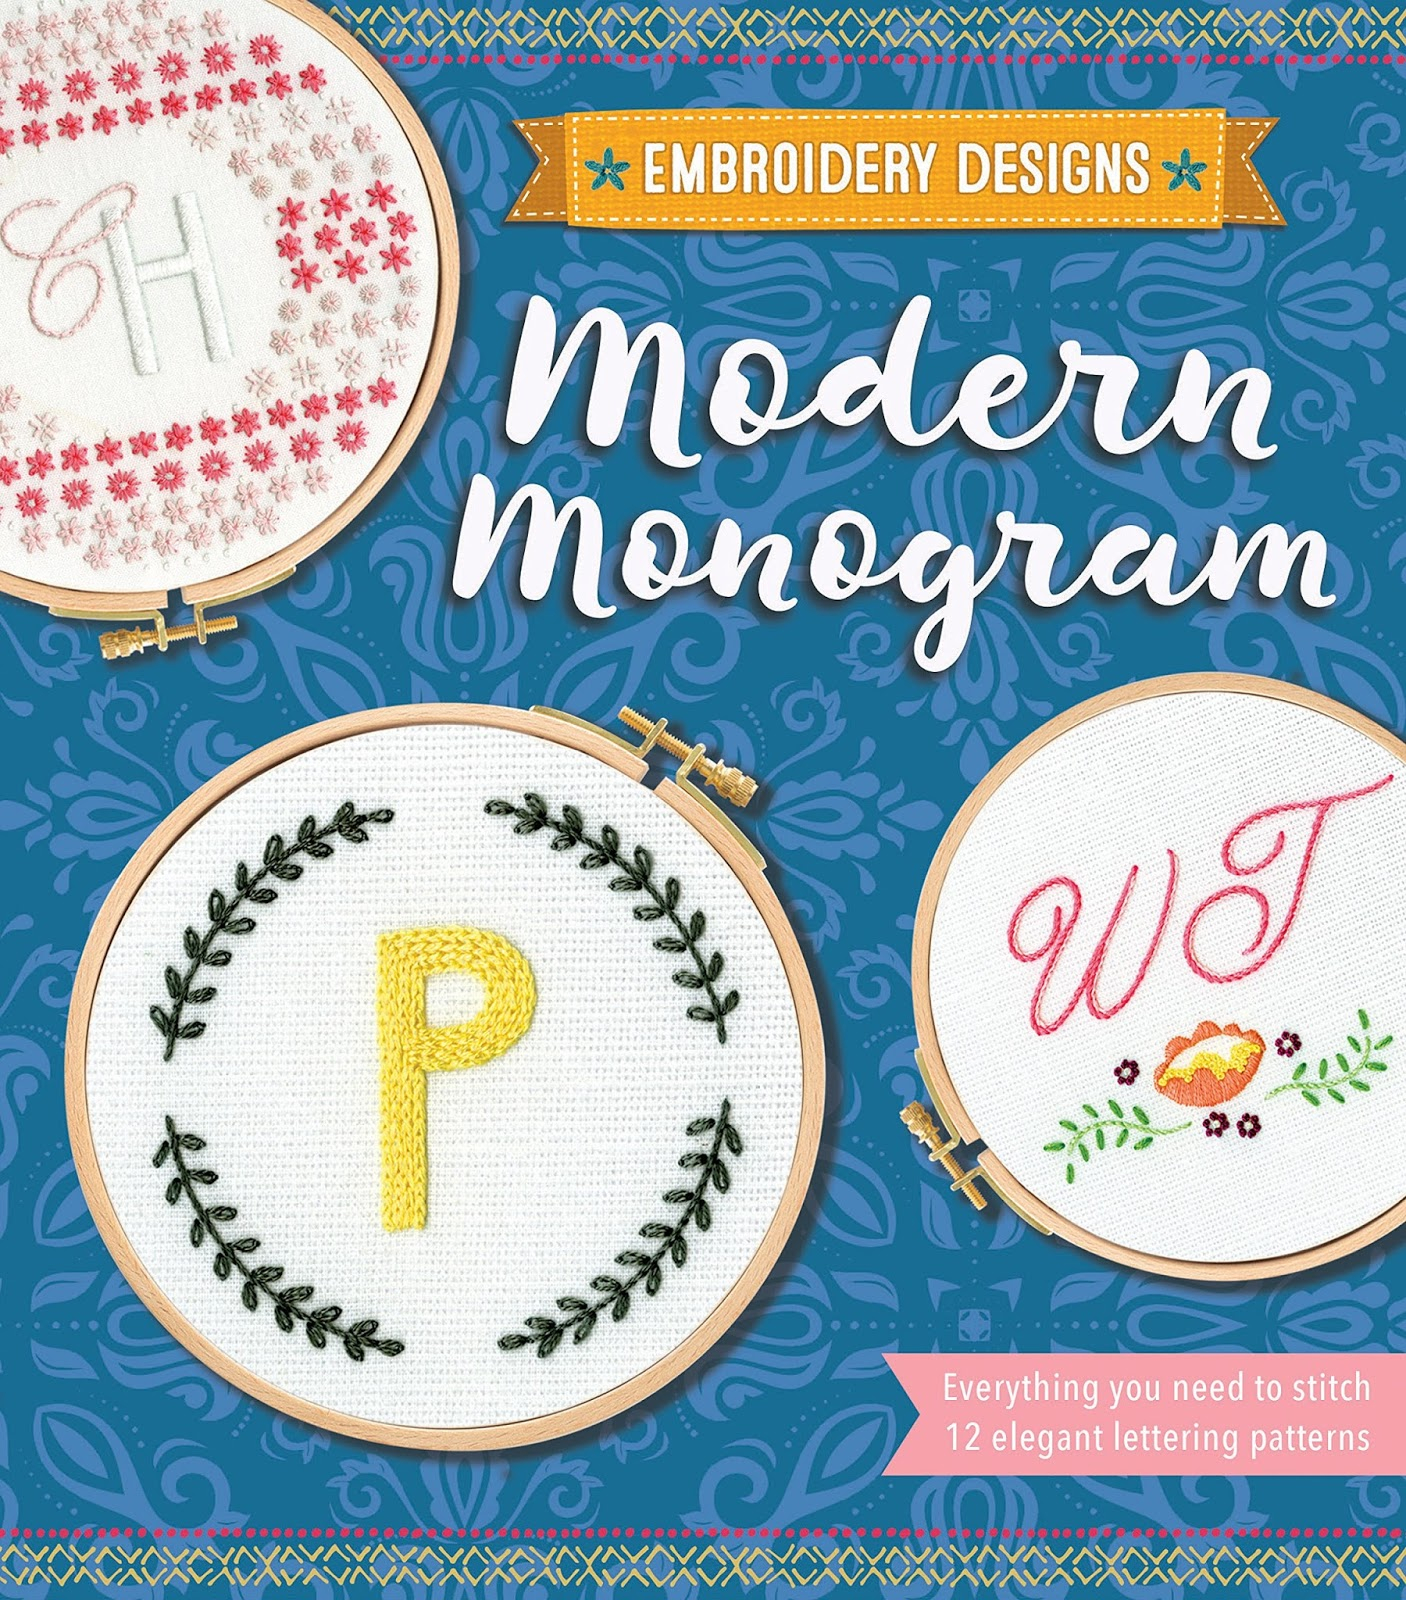 Monogram Patterns For Embroidery Handmade Deb Embroidery Designs Modern Monogram Kit Review